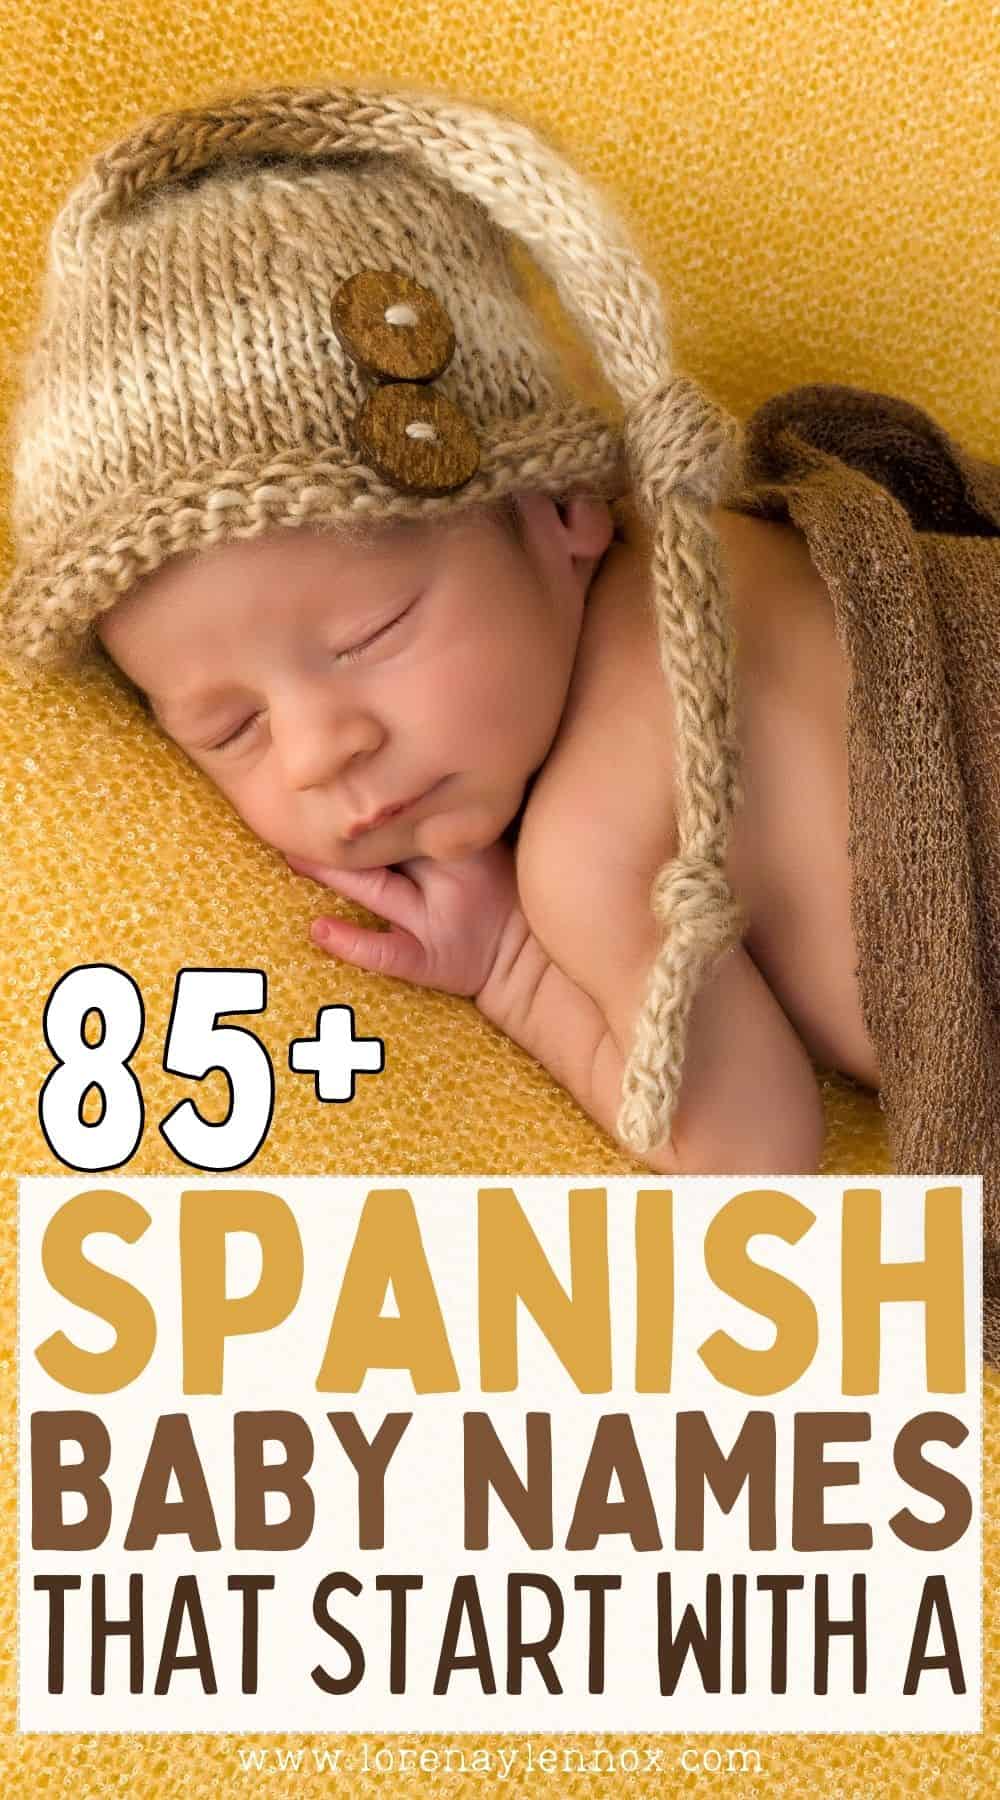 If you're searching for beautiful and meaningful Spanish baby names that start with A, you've come to the right place.